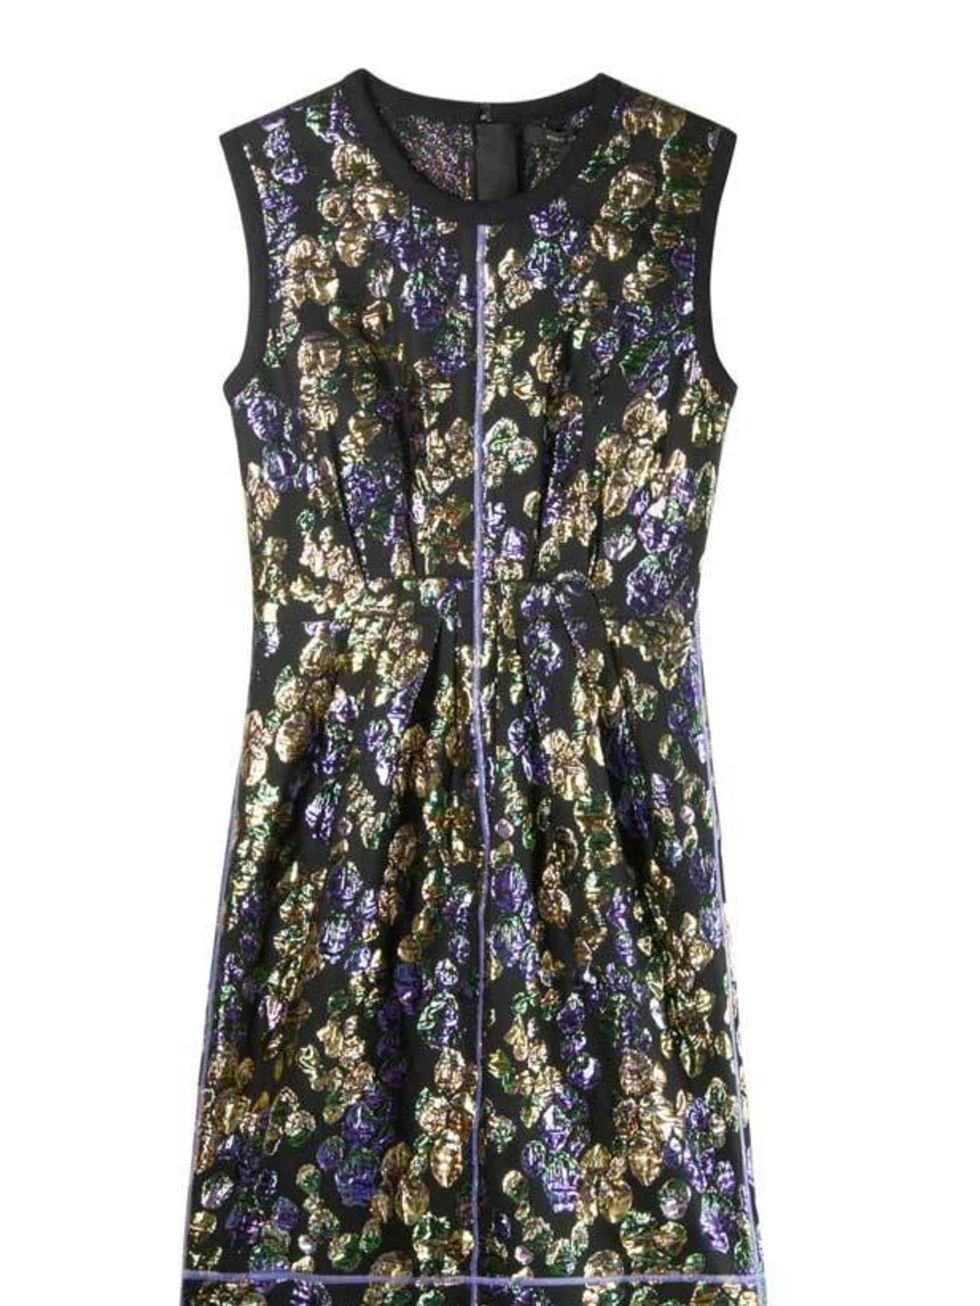 <p>Marc Jacobs brocade cotton dress, £79 for 2 nights, at <a href="http://hire.girlmeetsdress.com/products/brocade-cotton-dress">girlmeetsdress.com </a></p>